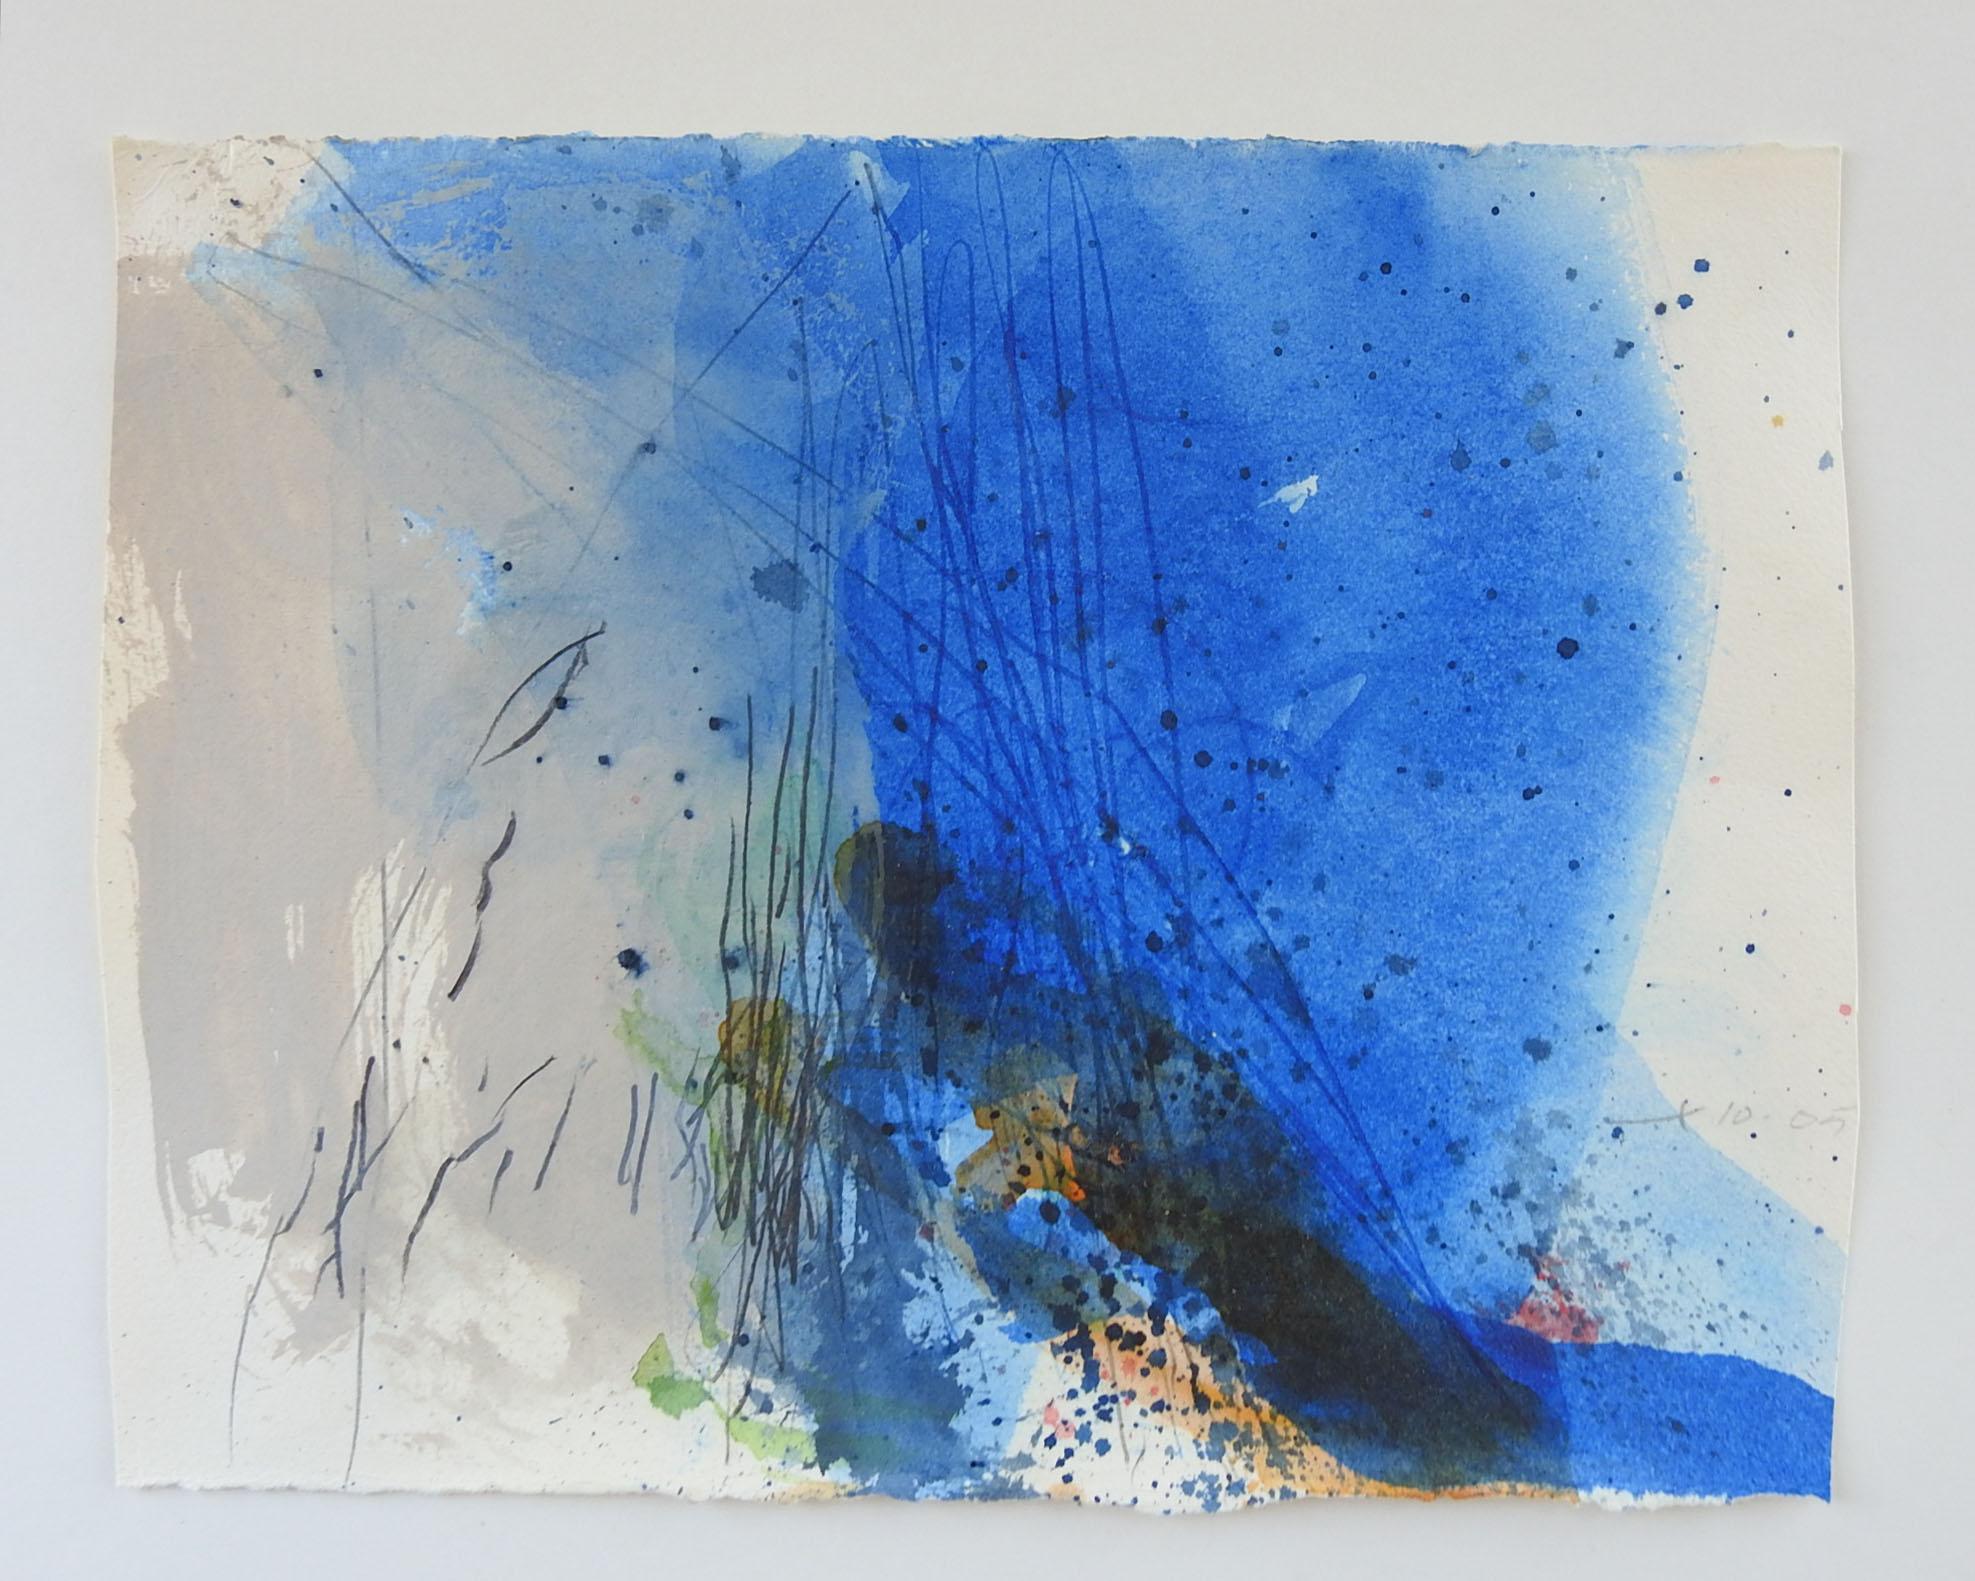 Vintage watercolor and mixed media abstract painting by artist George Turner ( 1943-2014) Illinois.  on watercolor paper. The piece is signed and dated in pencil in the lower right corner. Unframed, uneven edge trimming.